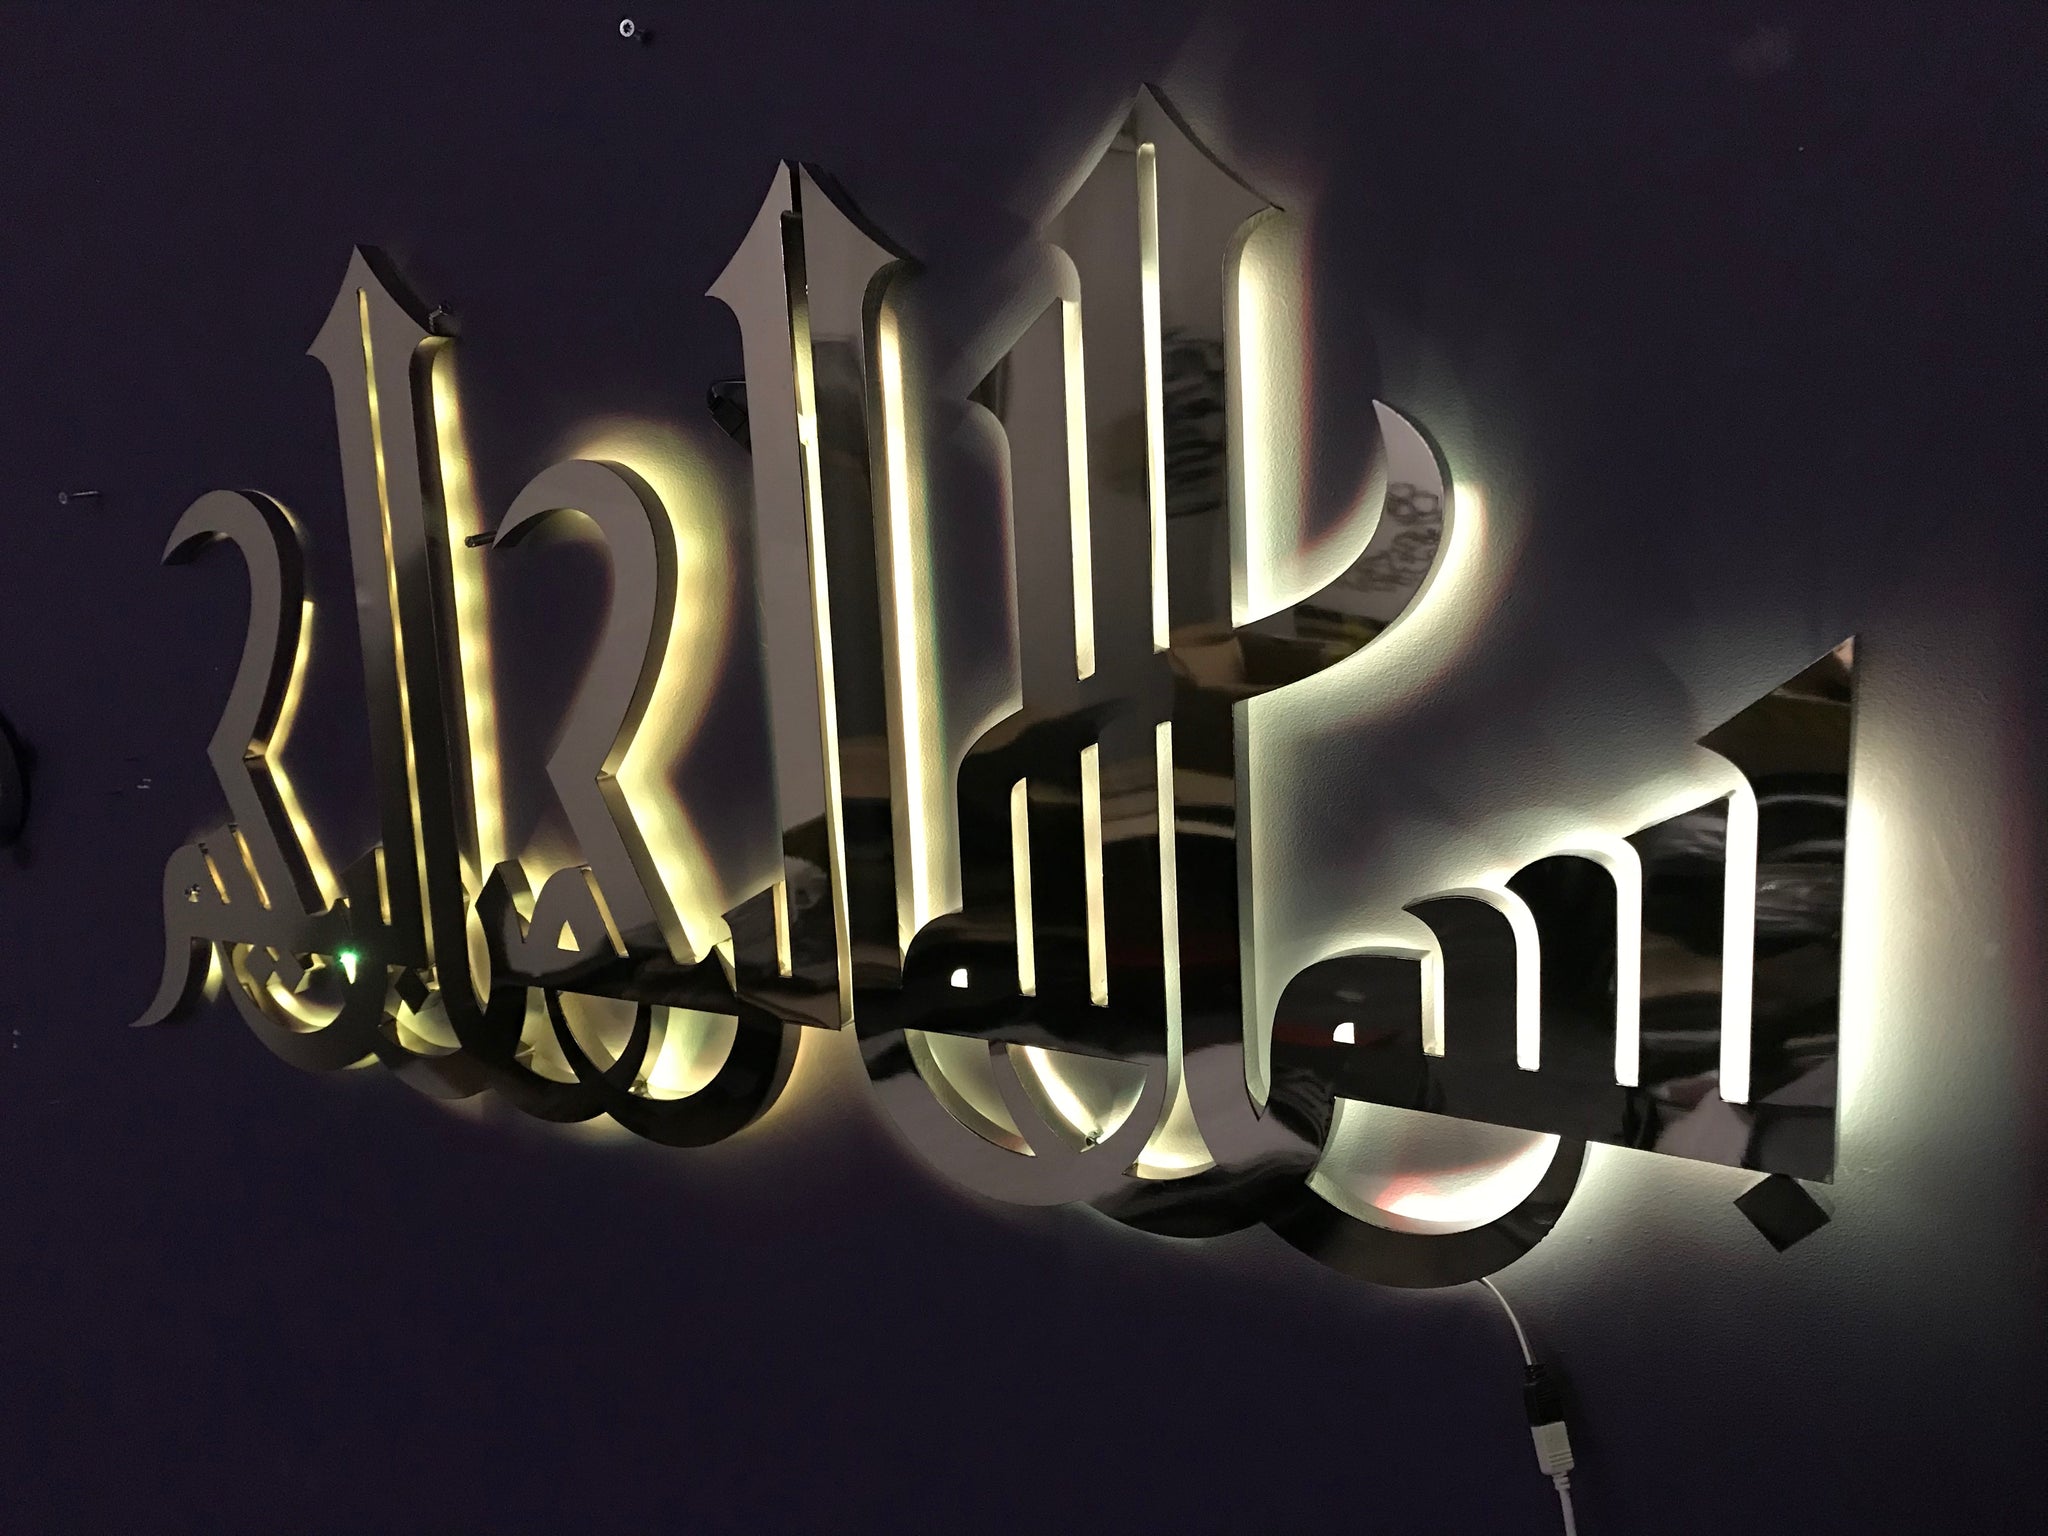 New 3D Bismillah LED Wall Art Stainless Steel Islamic Calligraphy